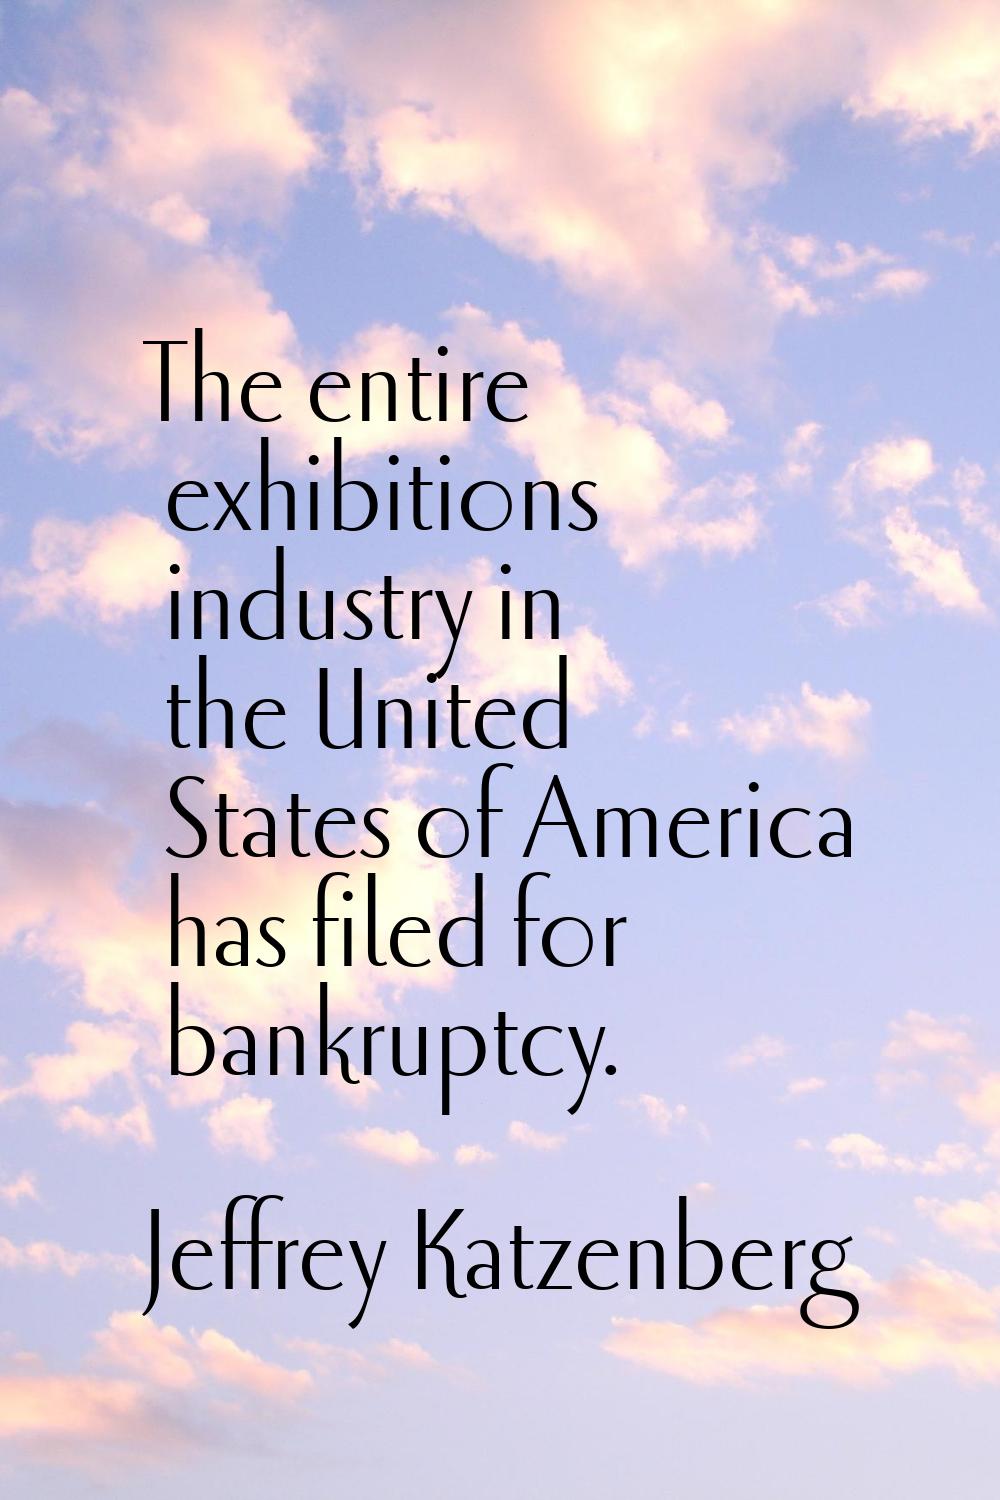 The entire exhibitions industry in the United States of America has filed for bankruptcy.